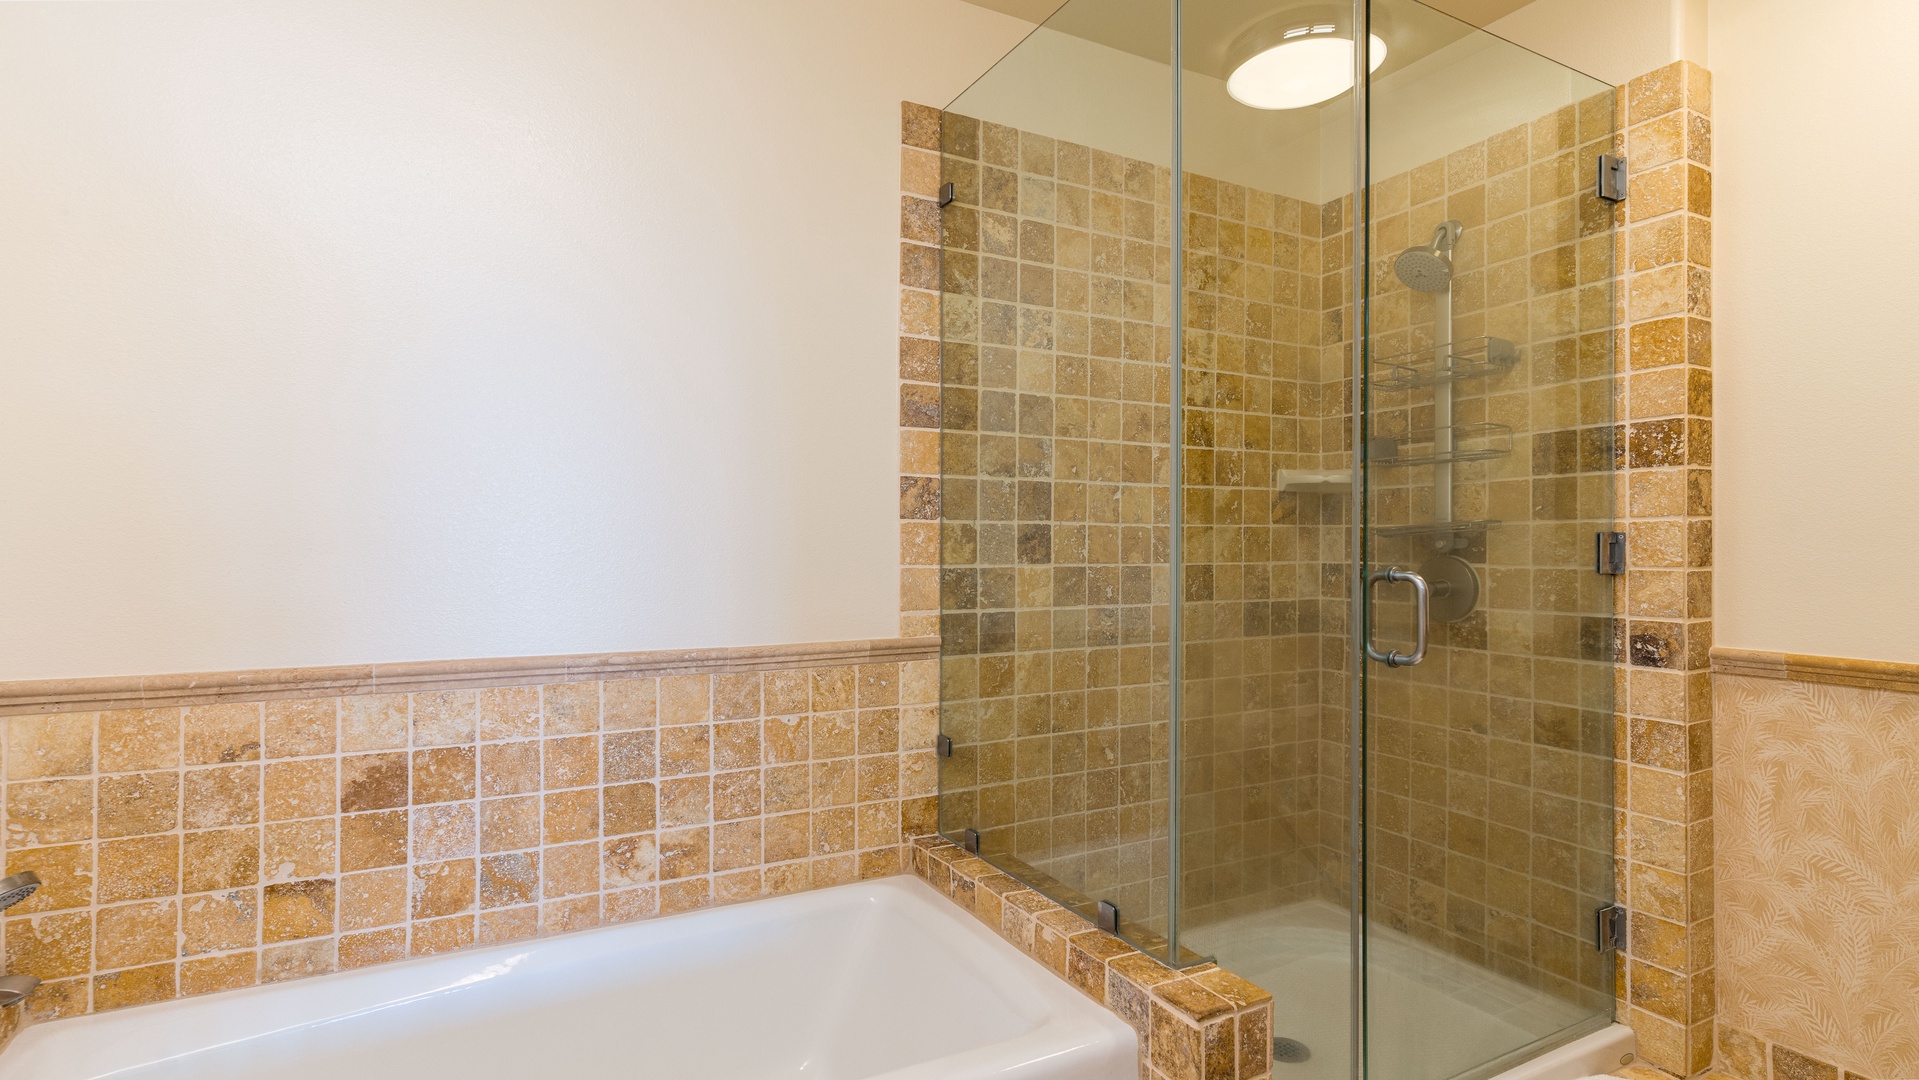 Kapolei Vacation Rentals, Kai Lani 21C - The primary guest bathroom has a shower and tub combination.